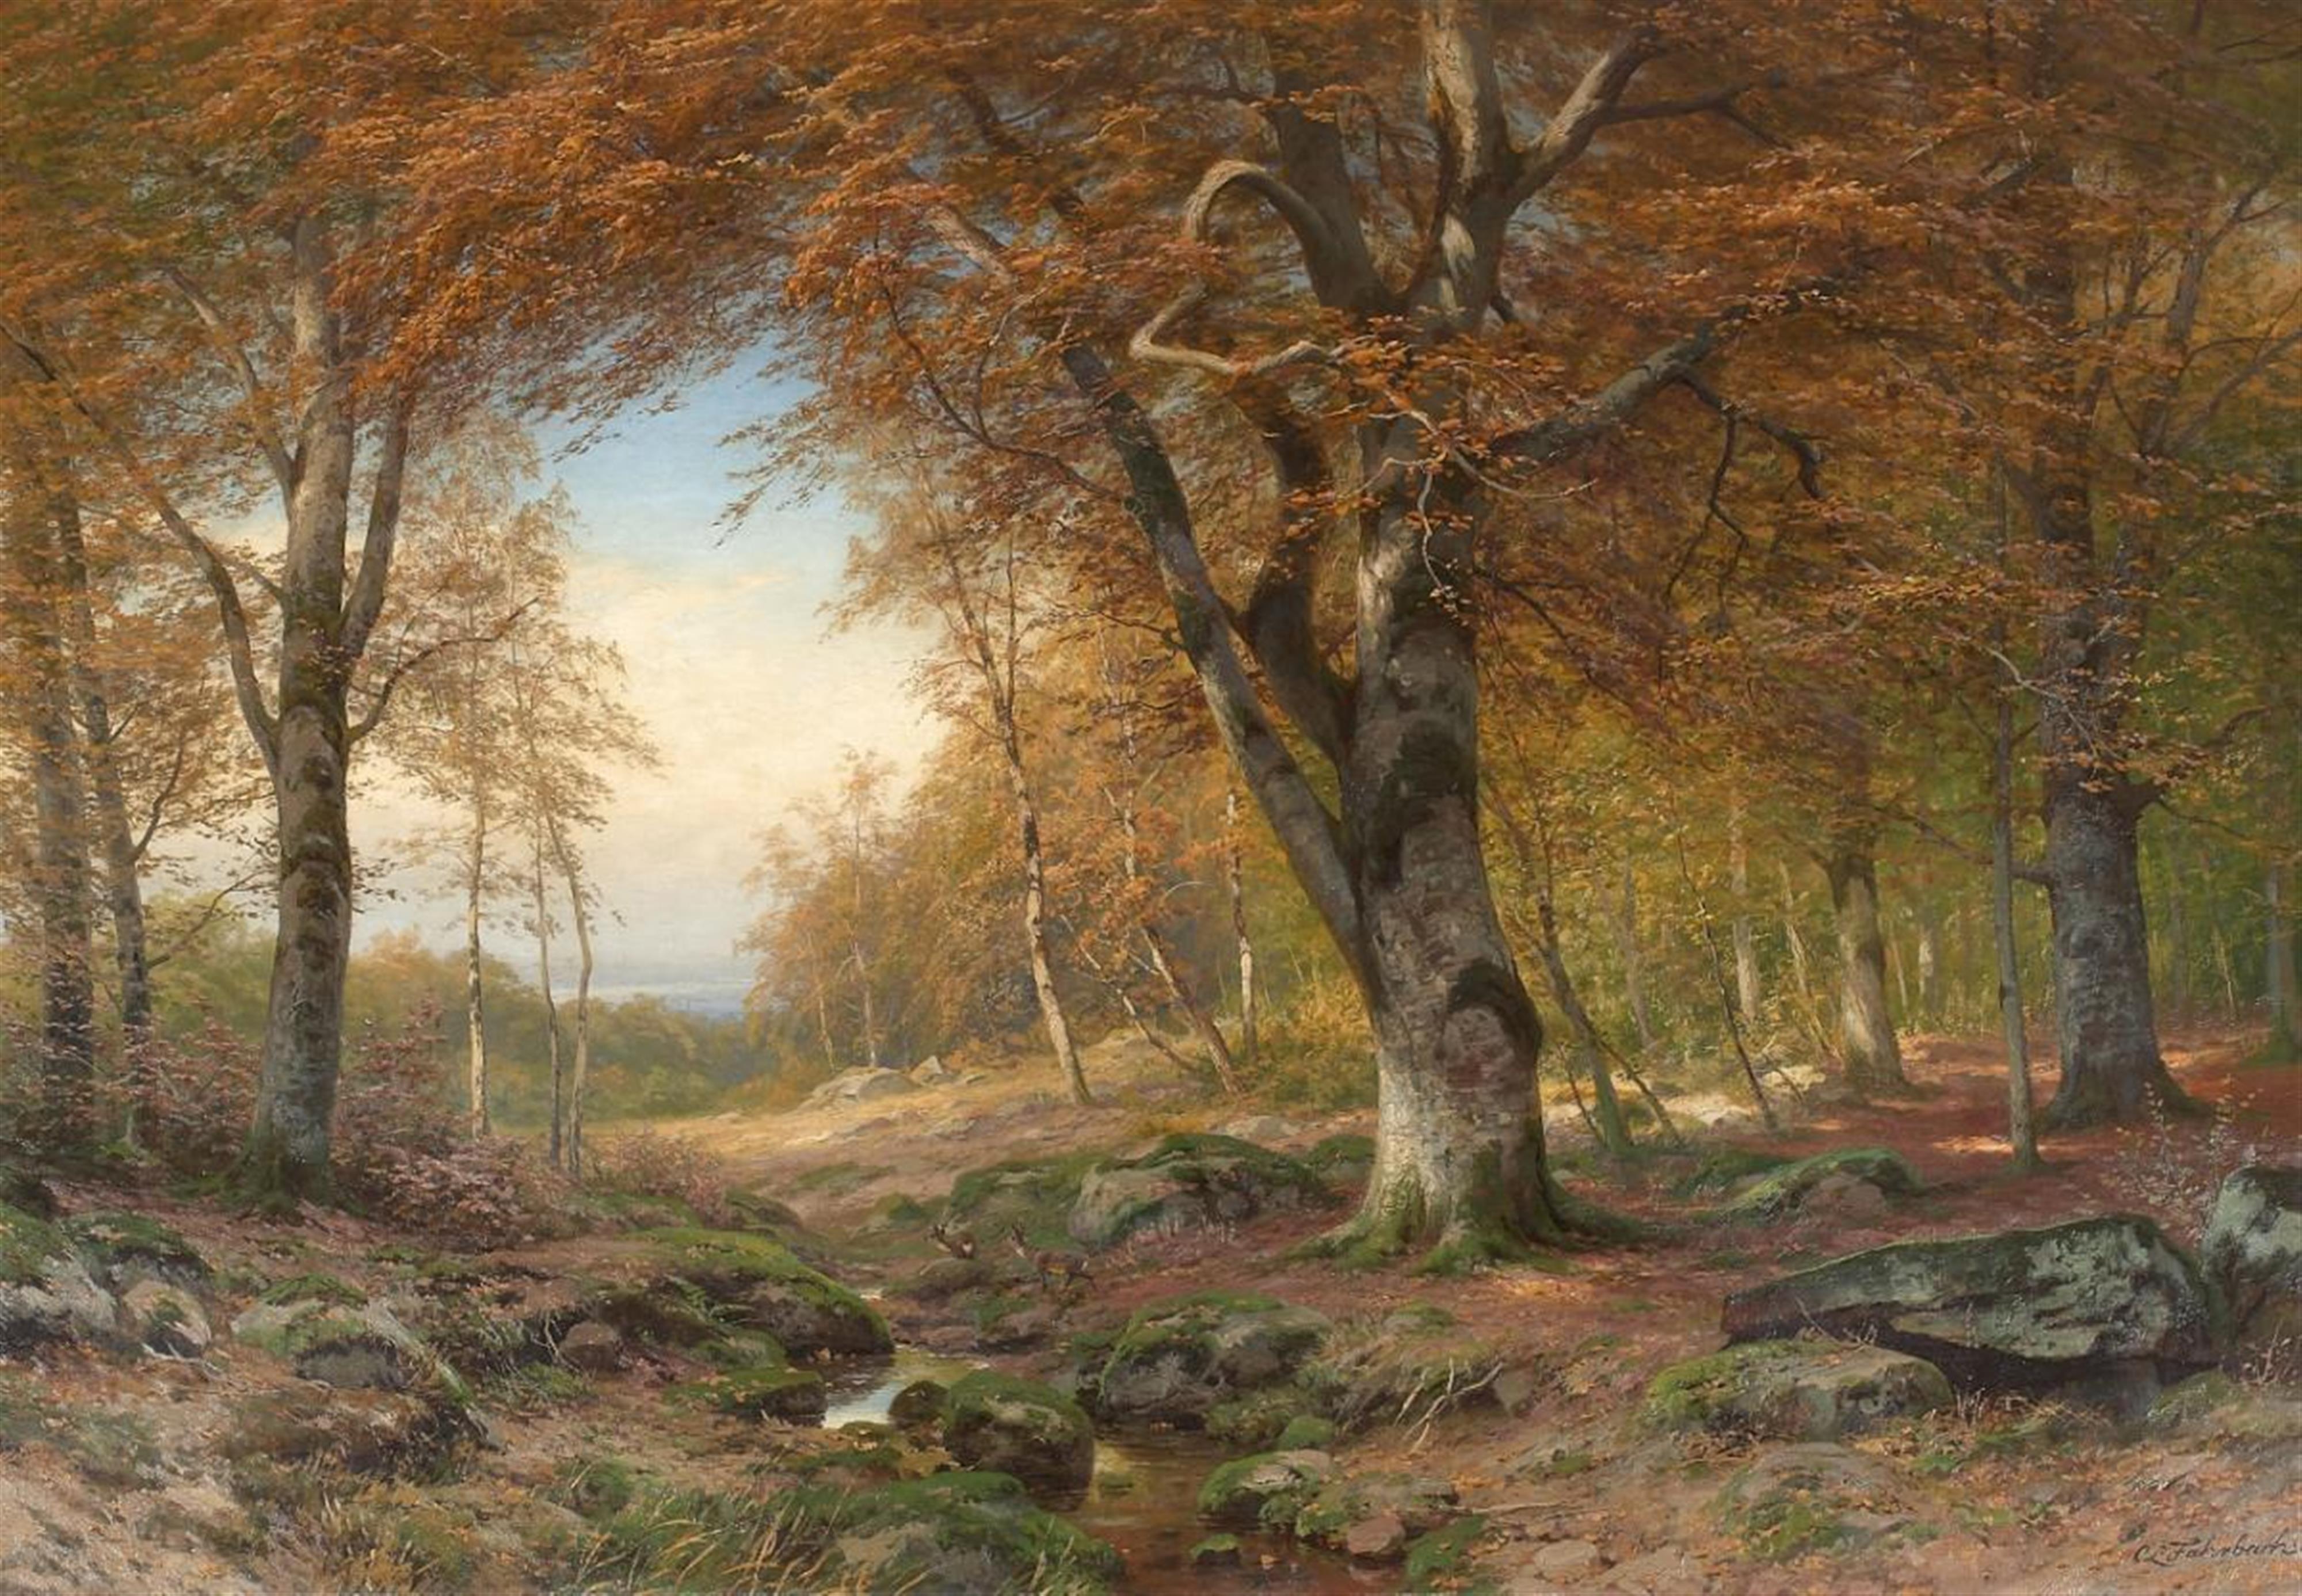 Carl Ludwig Fahrbach - LATE AUTUMN IN A BEECH FOREST